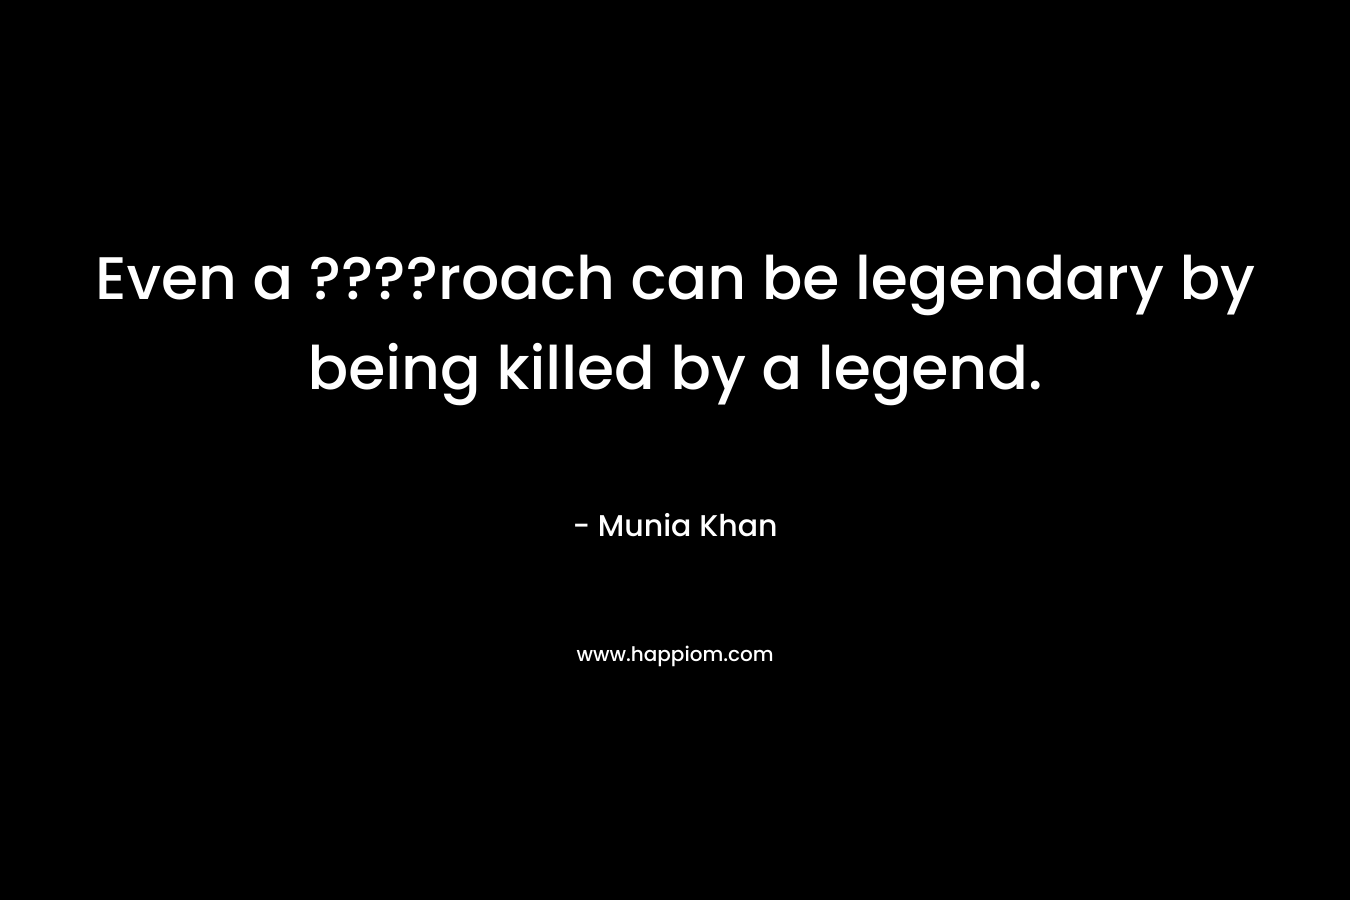 Even a ????roach can be legendary by being killed by a legend. – Munia Khan